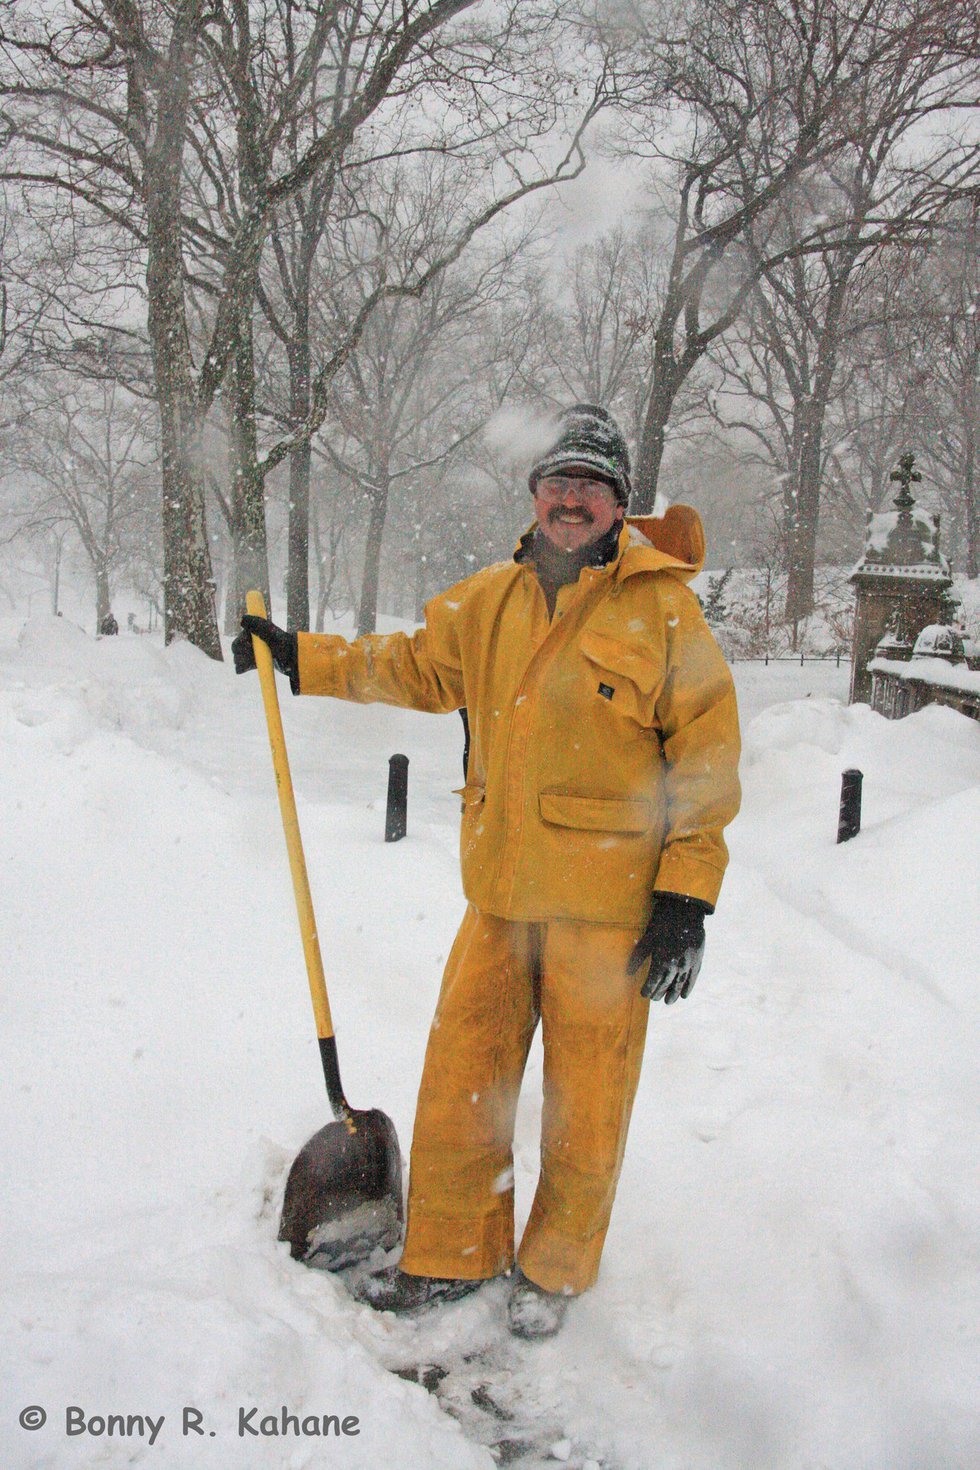 Harry shoveling as the snow falls